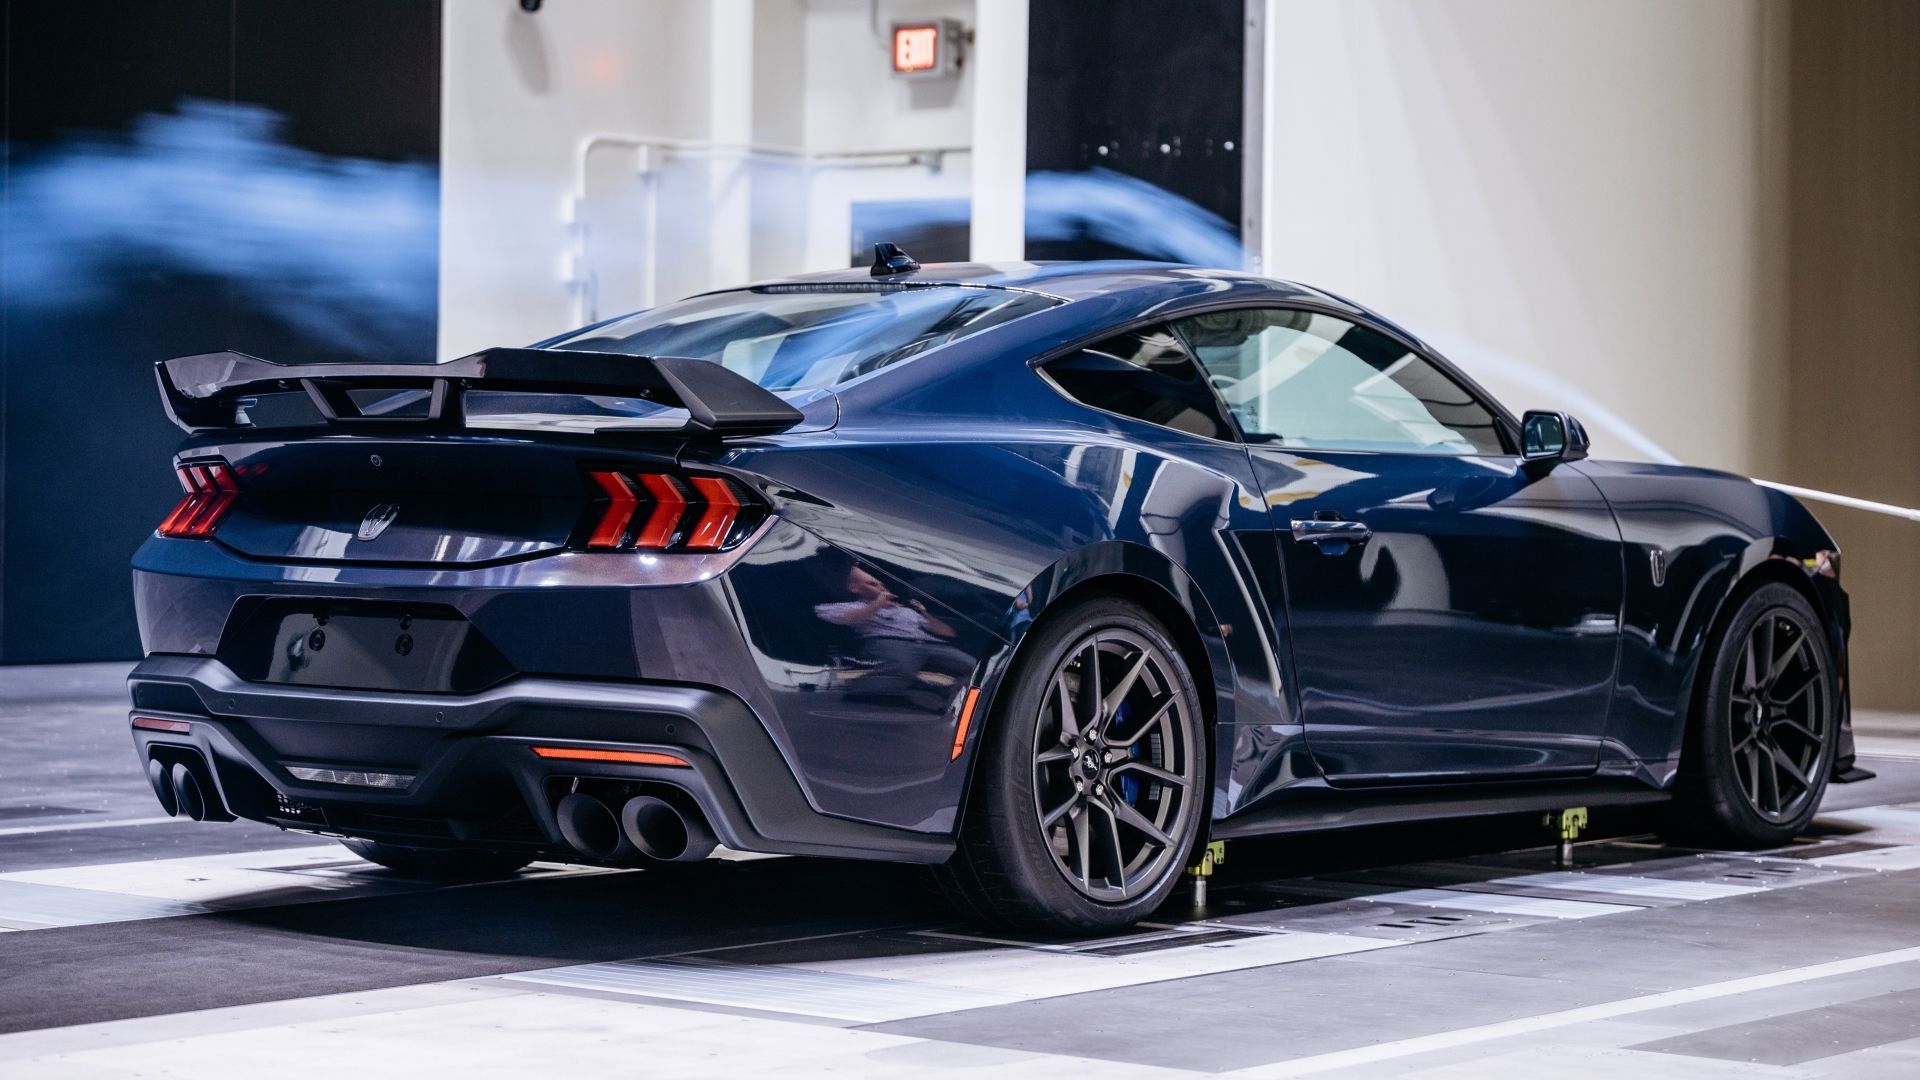 The 2022 Ford Mustang Dark Horse In Ford's Rolling Wind Tunnel